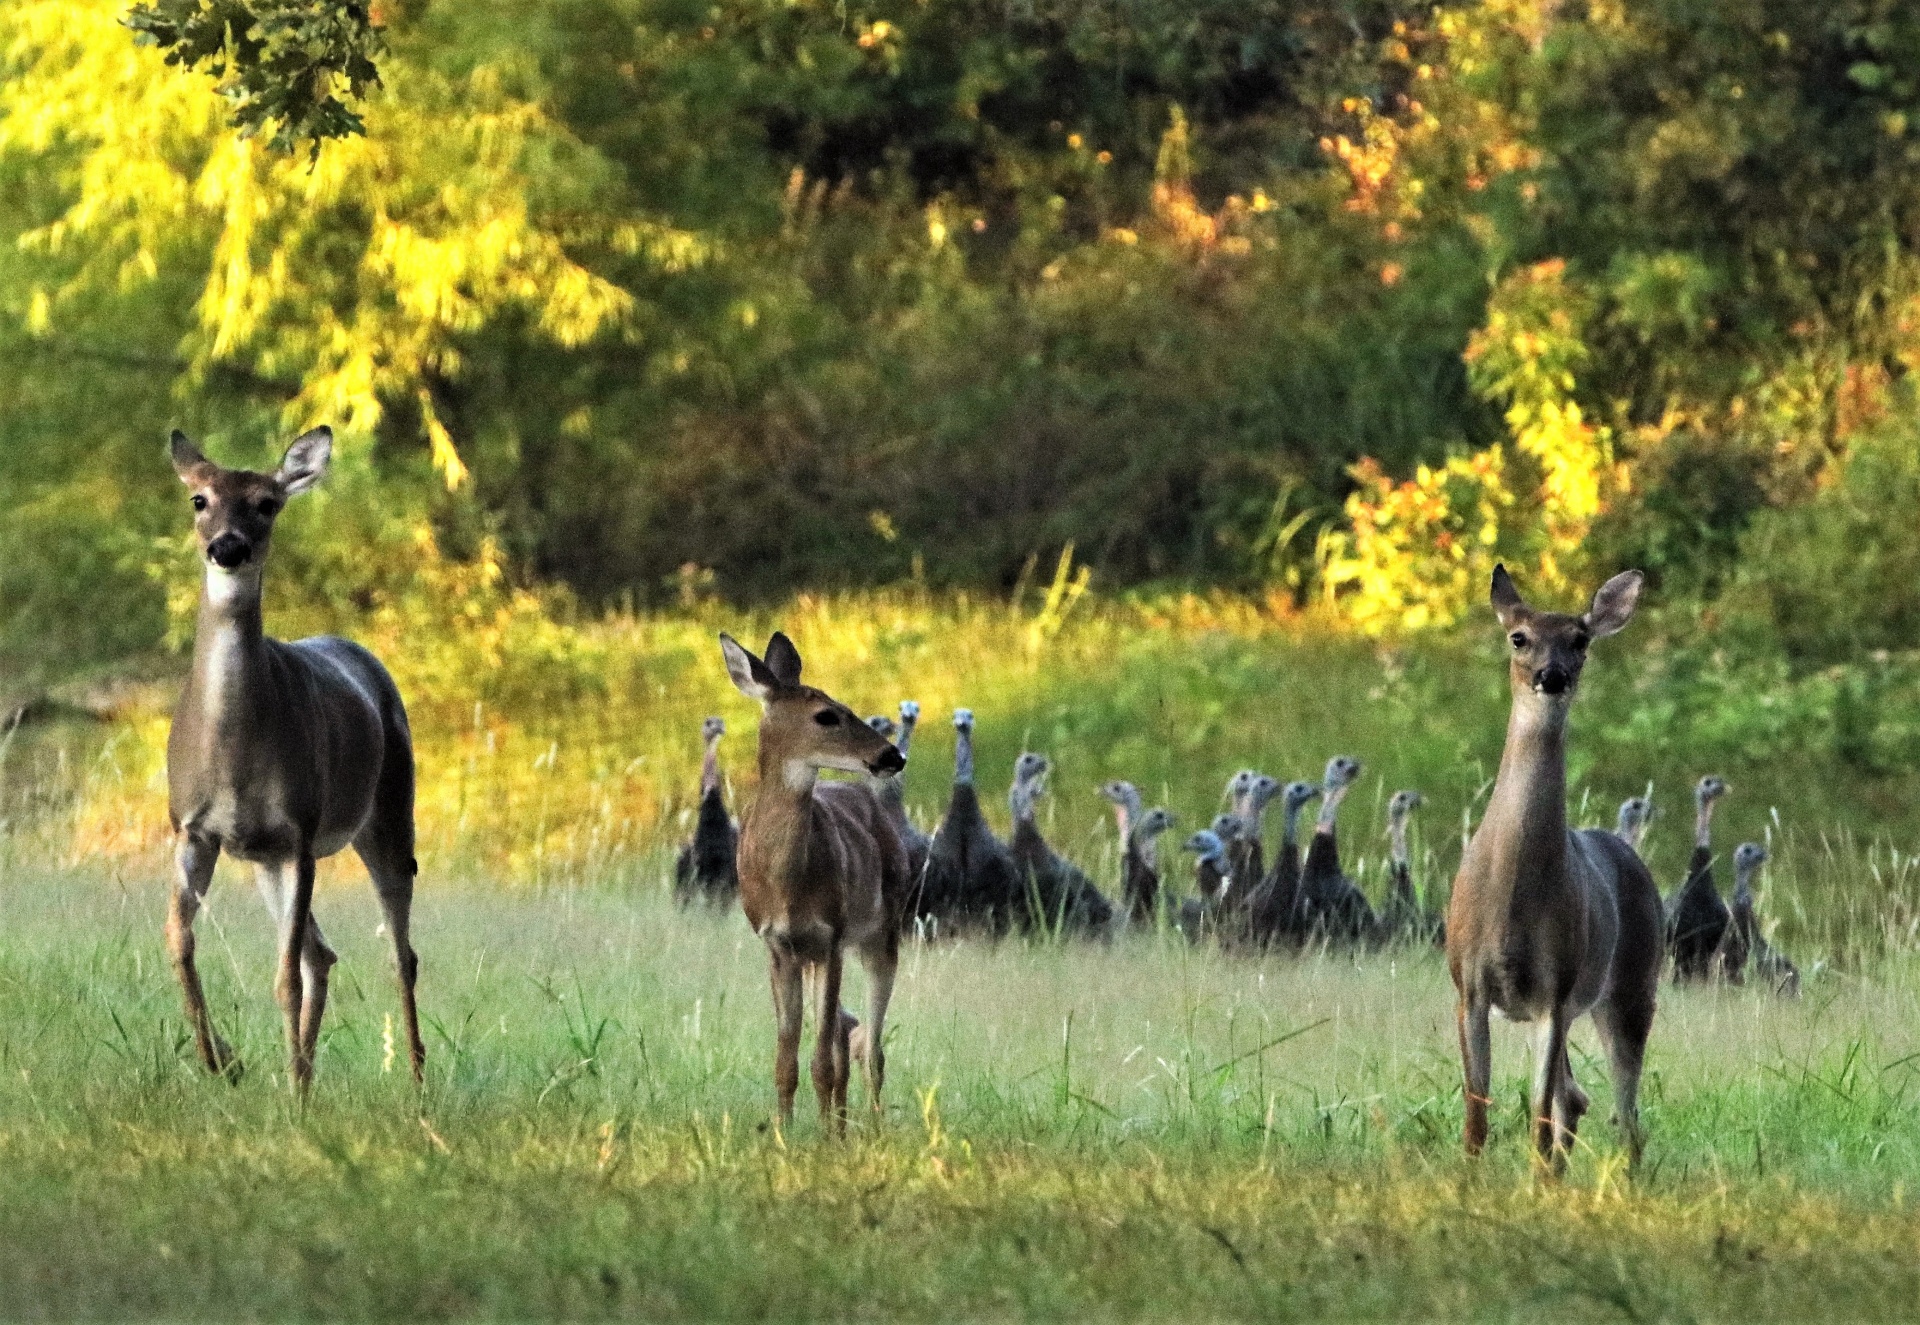 Three white-tail deer walking towards camera with a large group of wild turkey walking along behind them, in a green country field.